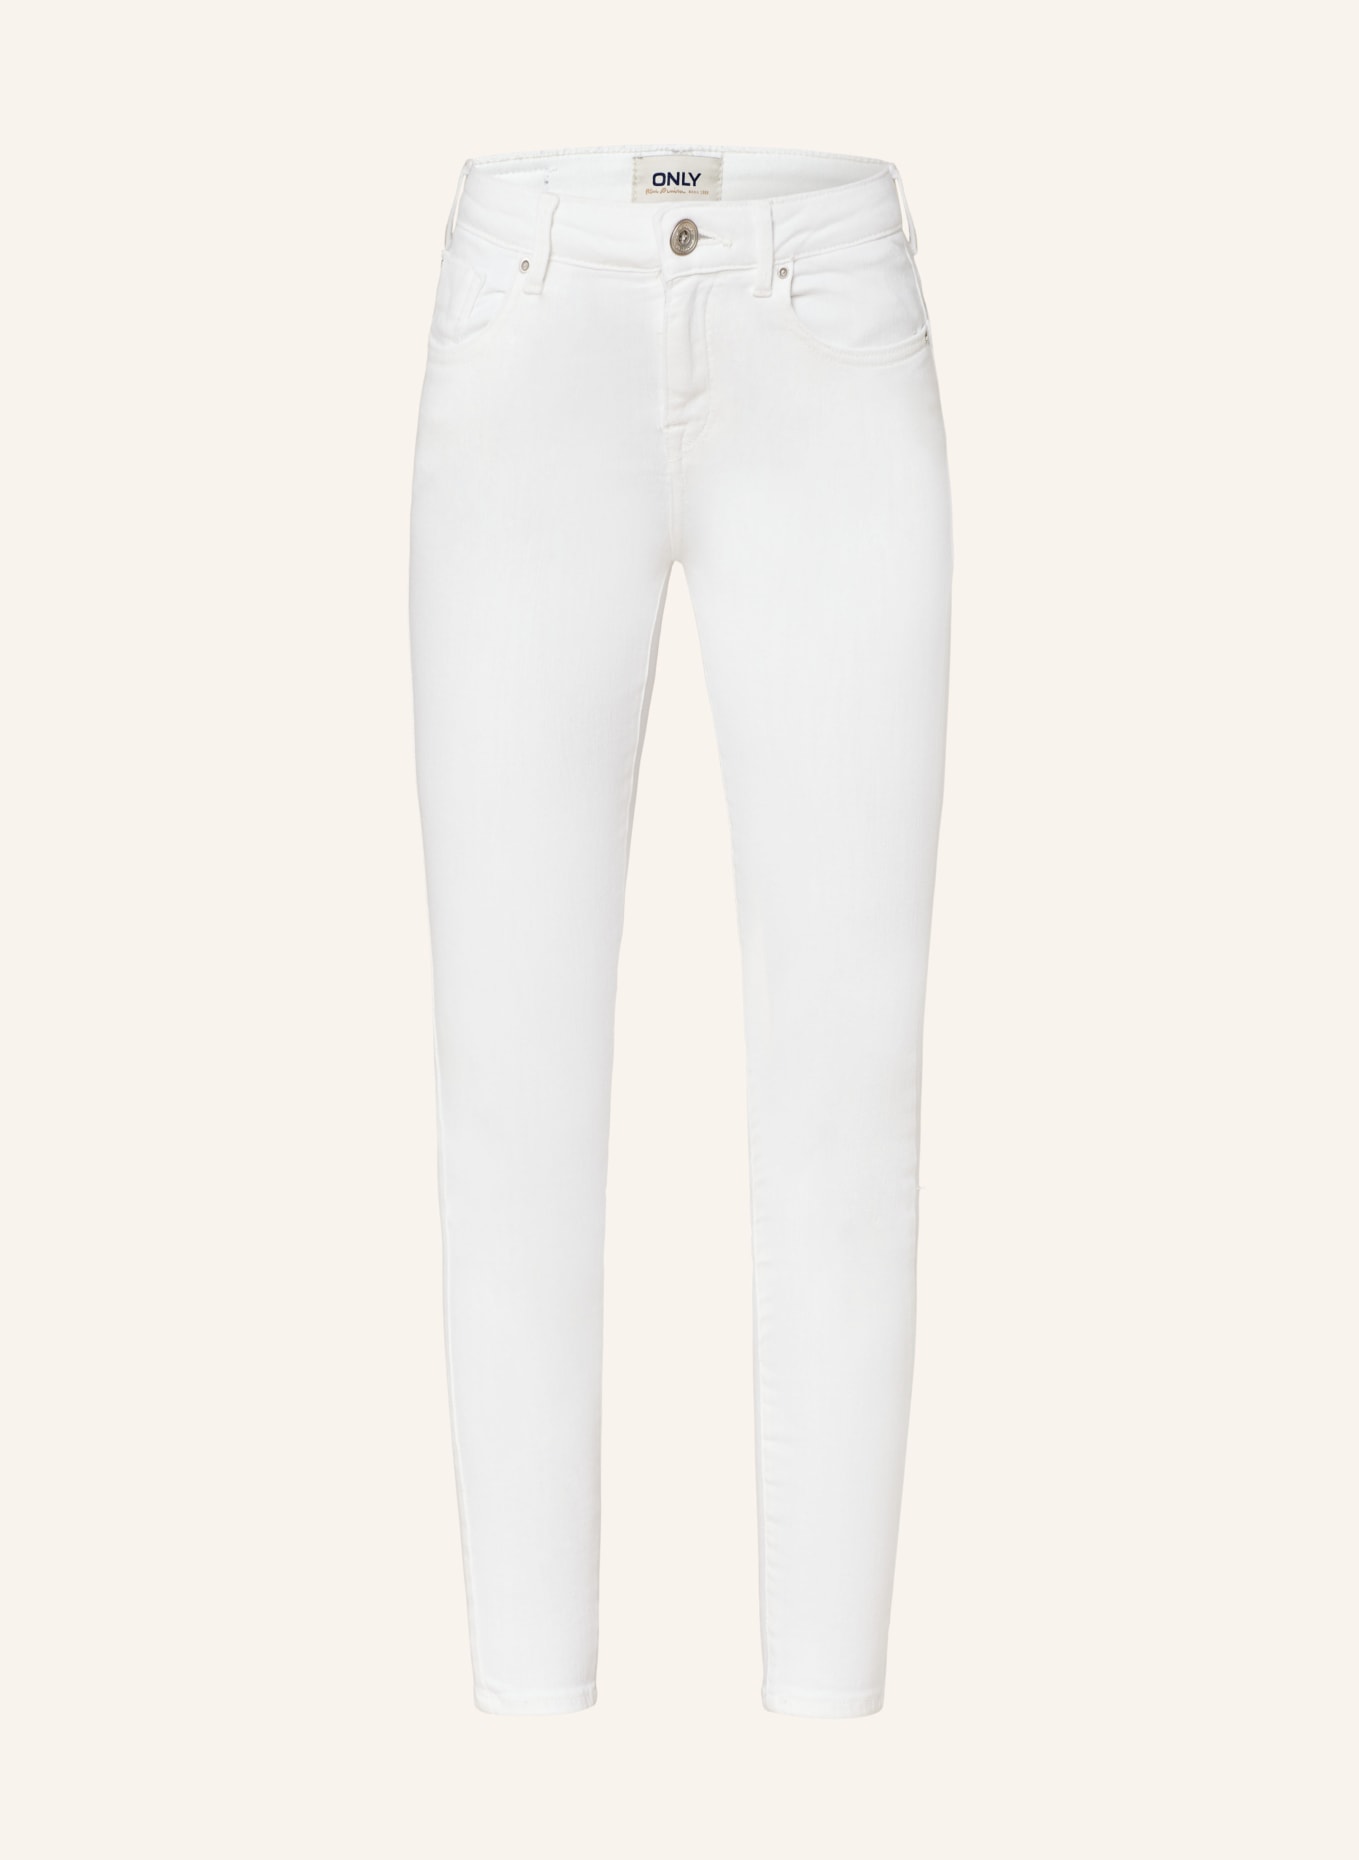 ONLY Skinny Jeans, Farbe: WEISS (Bild 1)